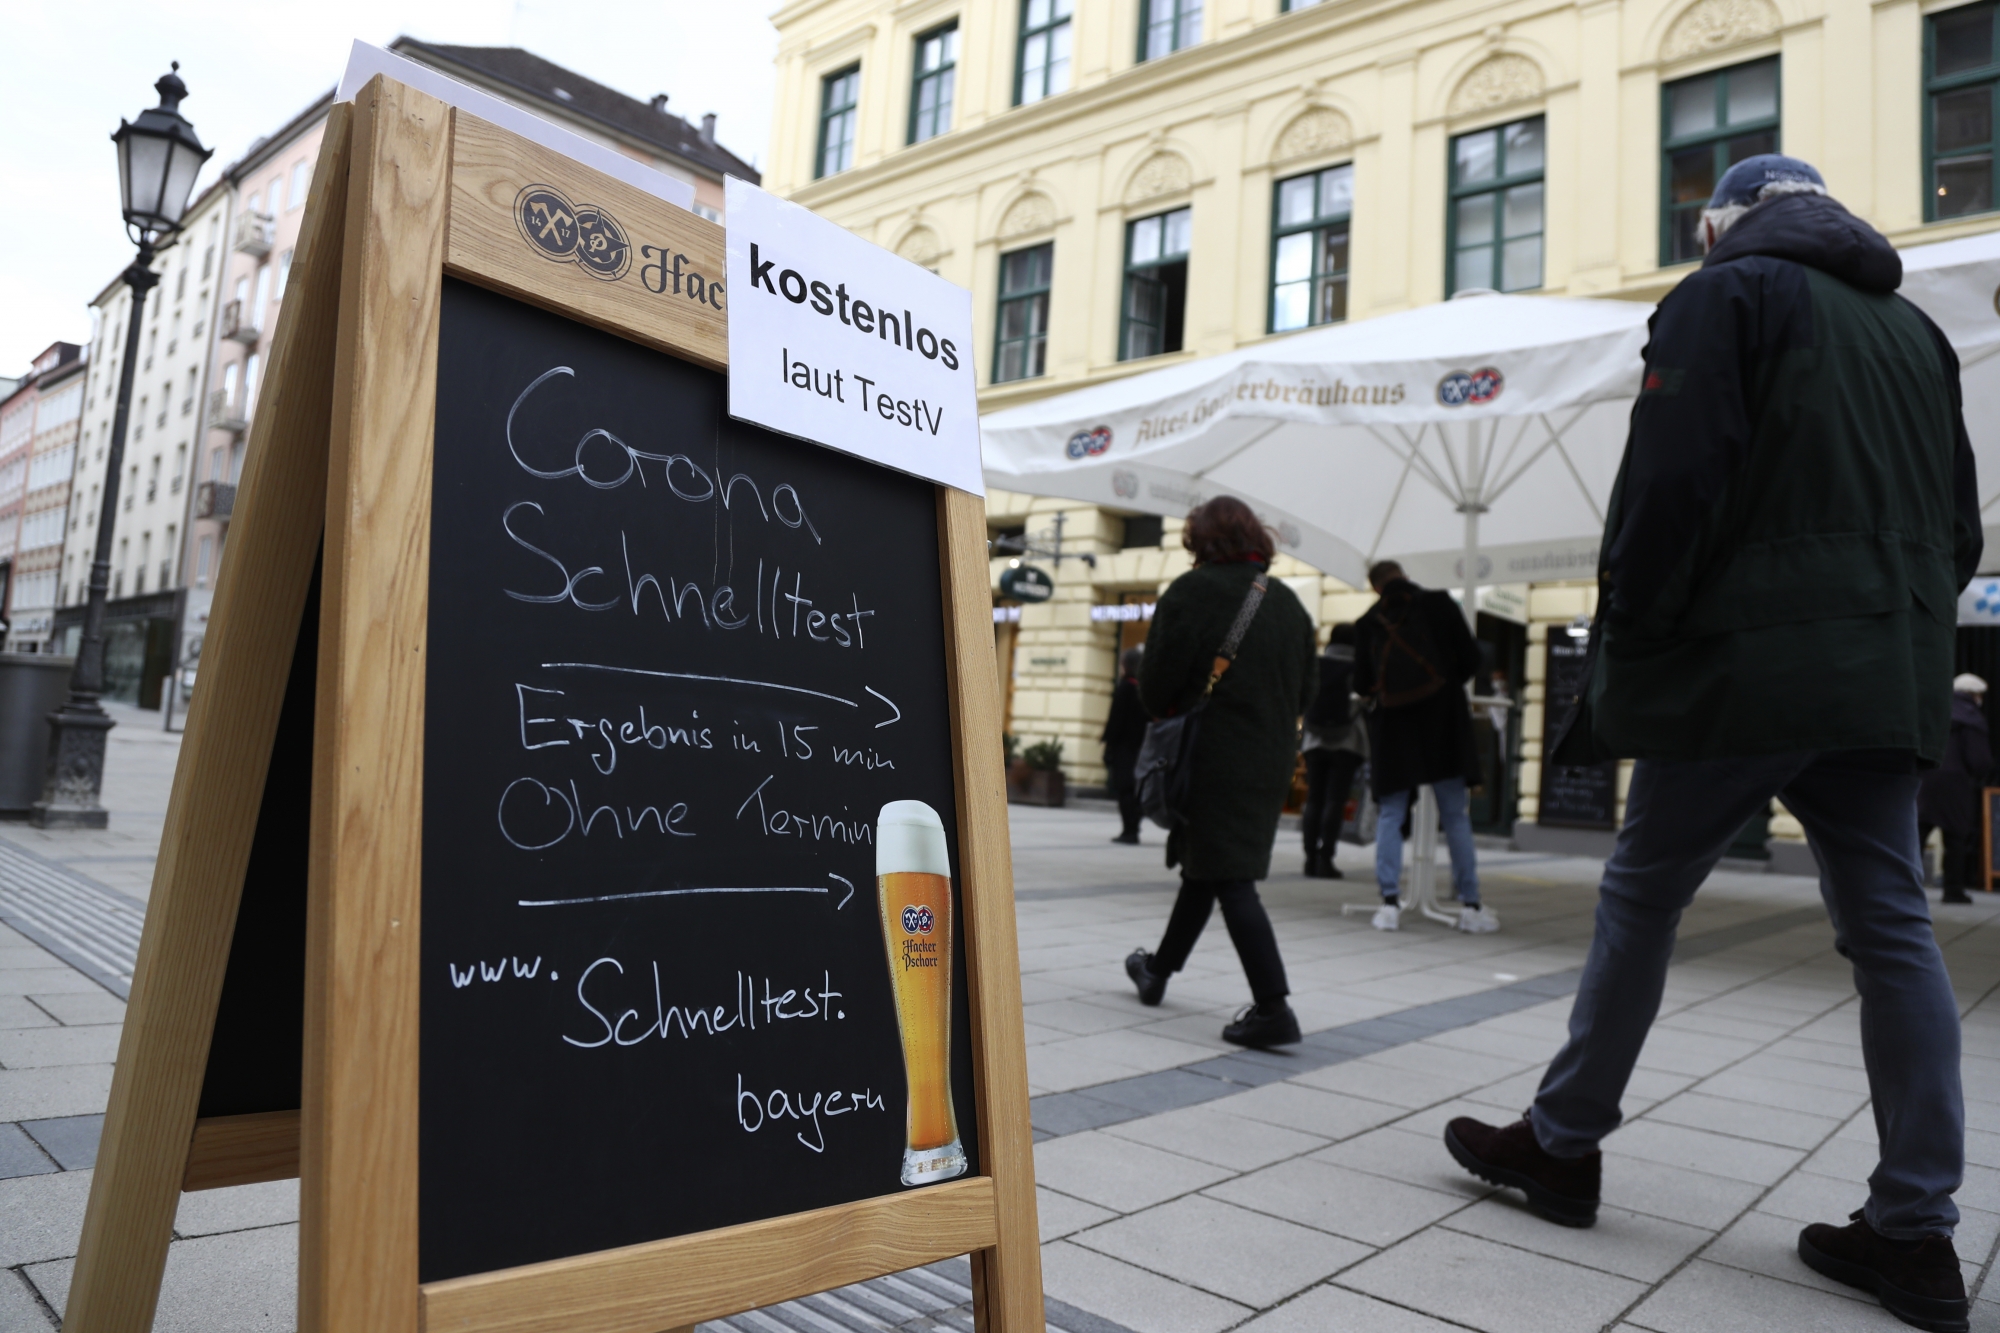 People pass the traditional Bavarian restaurant 'Hackerbraeuhaus' where a corona test center now works for SARS CoV-2 rapid tests downtown in Munich, Germany, Tuesday, March 23, 2021. (AP Photo/Matthias Schrader)